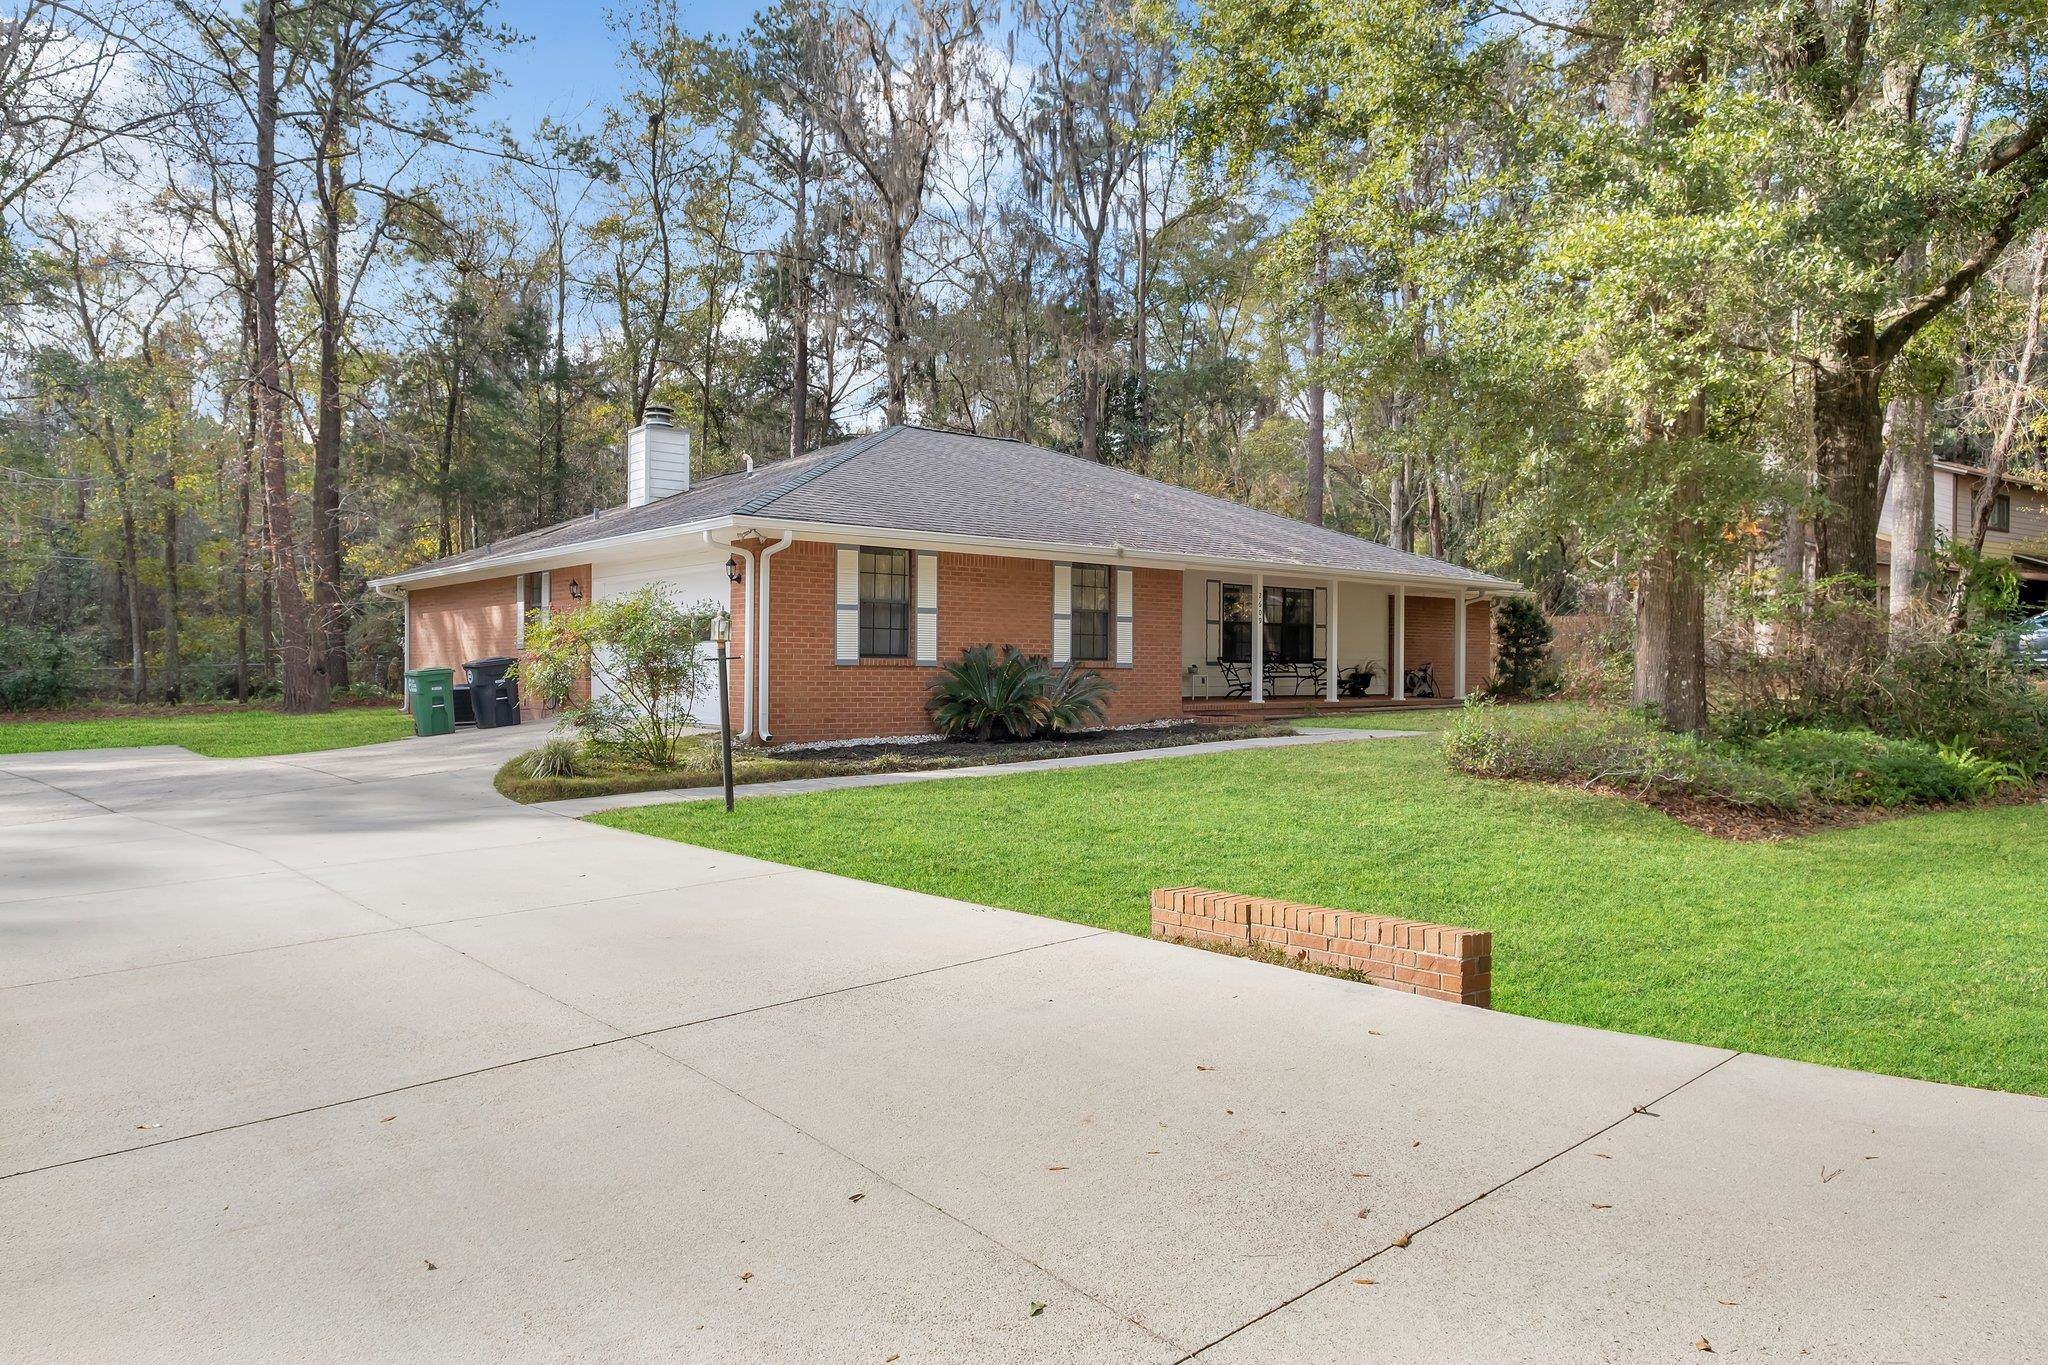 2609 Neuchatel Drive,TALLAHASSEE,Florida 32303,3 Bedrooms Bedrooms,2 BathroomsBathrooms,Detached single family,2609 Neuchatel Drive,369508